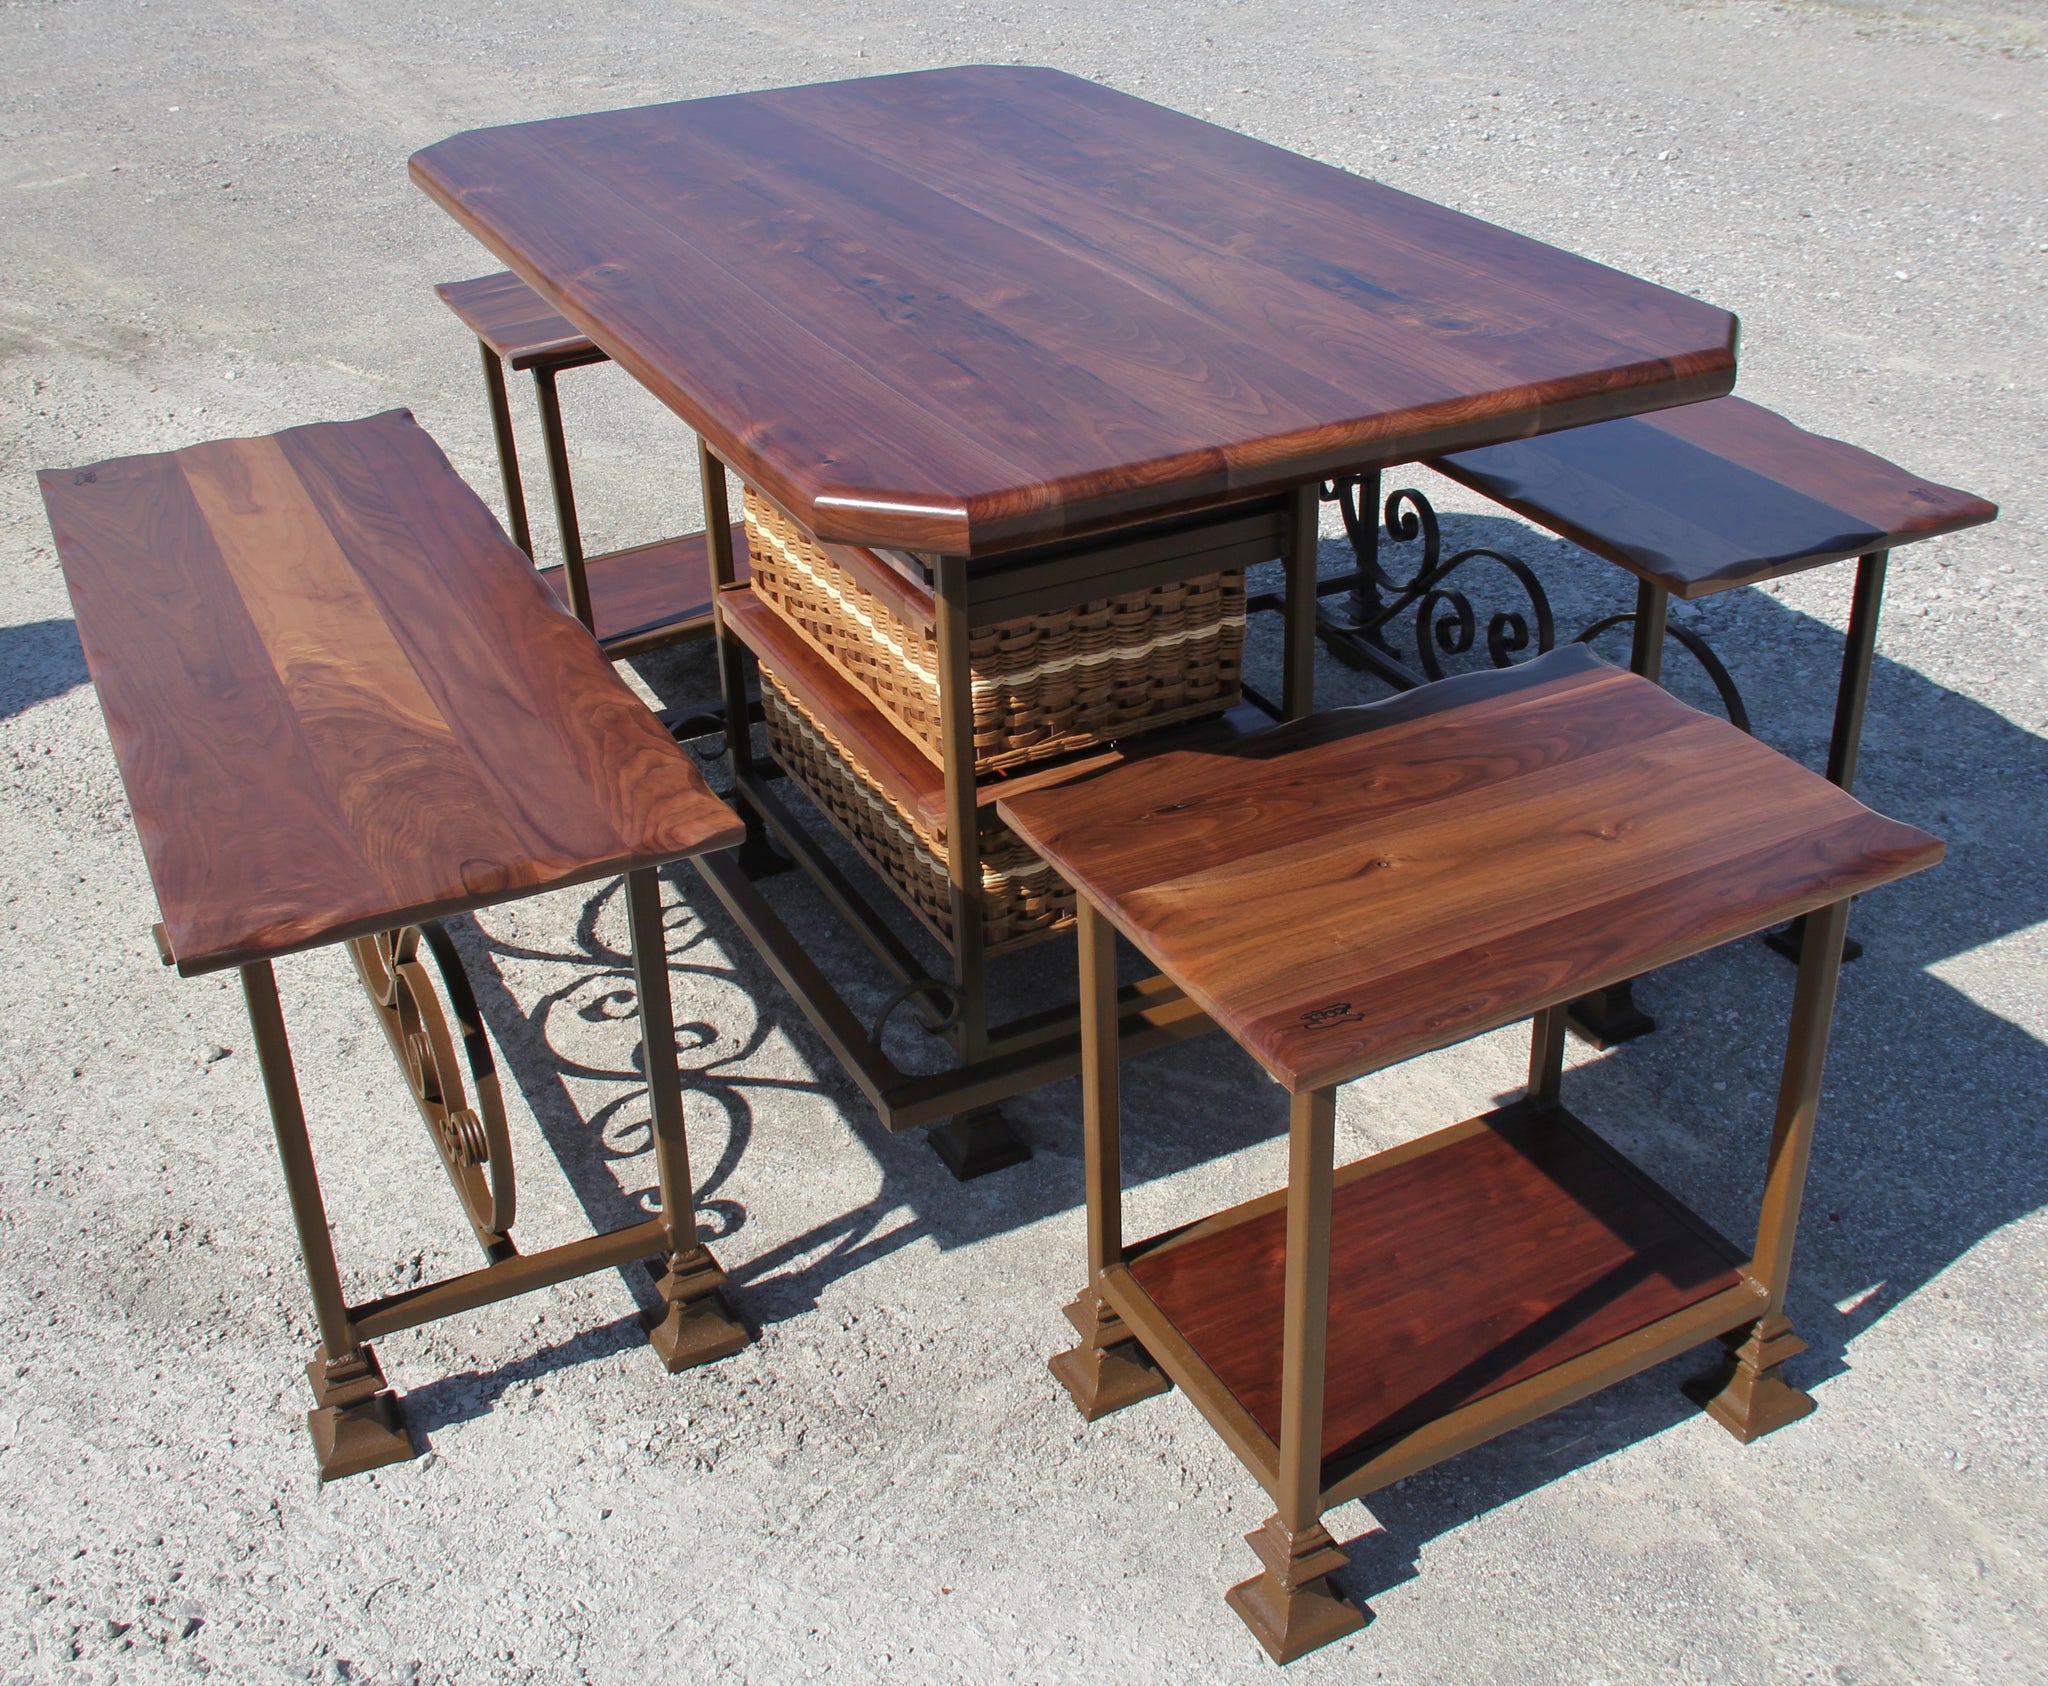 Table- 36x60 Black Walnut Table with 4 benches